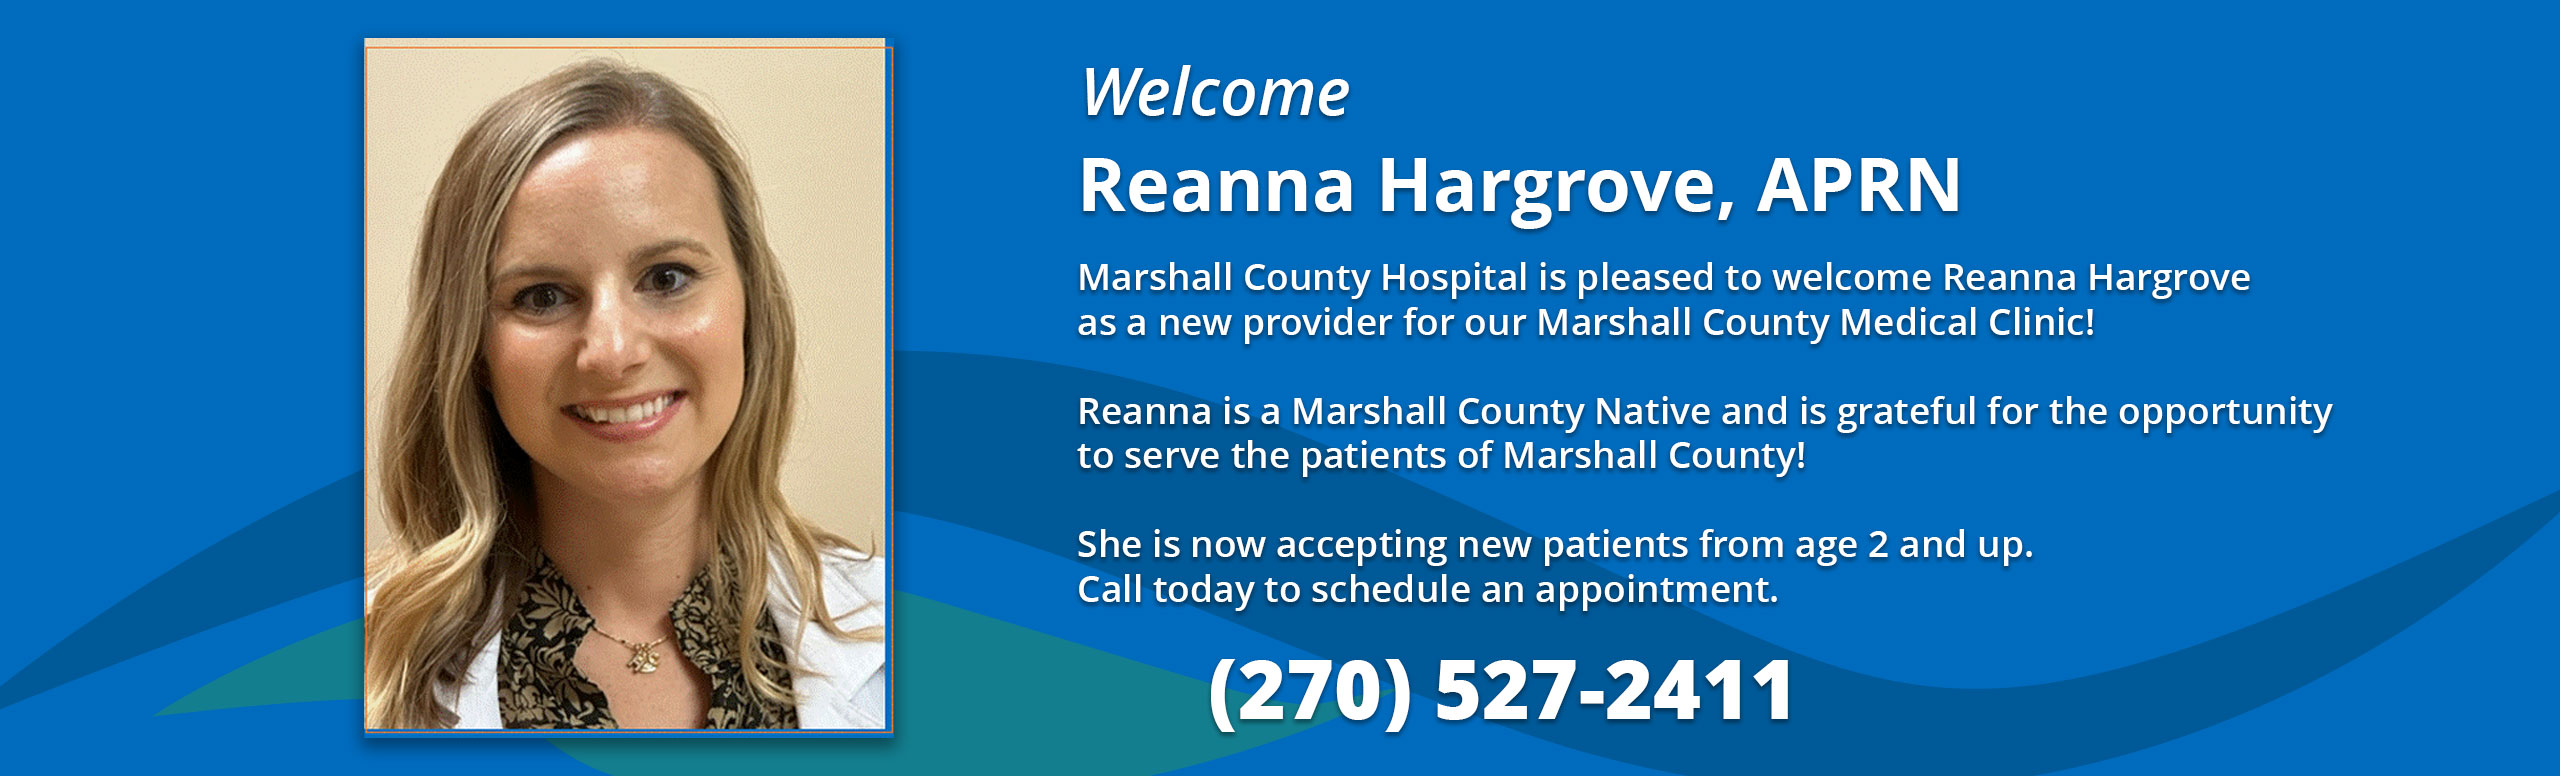 Welcome Reanna Hargrove, APRN
Marshall County Hospital is pleased to welcome Reanna Hargrove as a new provider for our 
Marshall County Medical Clinic!
Reanna is a Marshall County Native and is grateful for the opportunity to serve the patients of Marshall County!
She is now accepting new patients from age 2 and up. Call today to schedule an appointment.

(270)527-2411